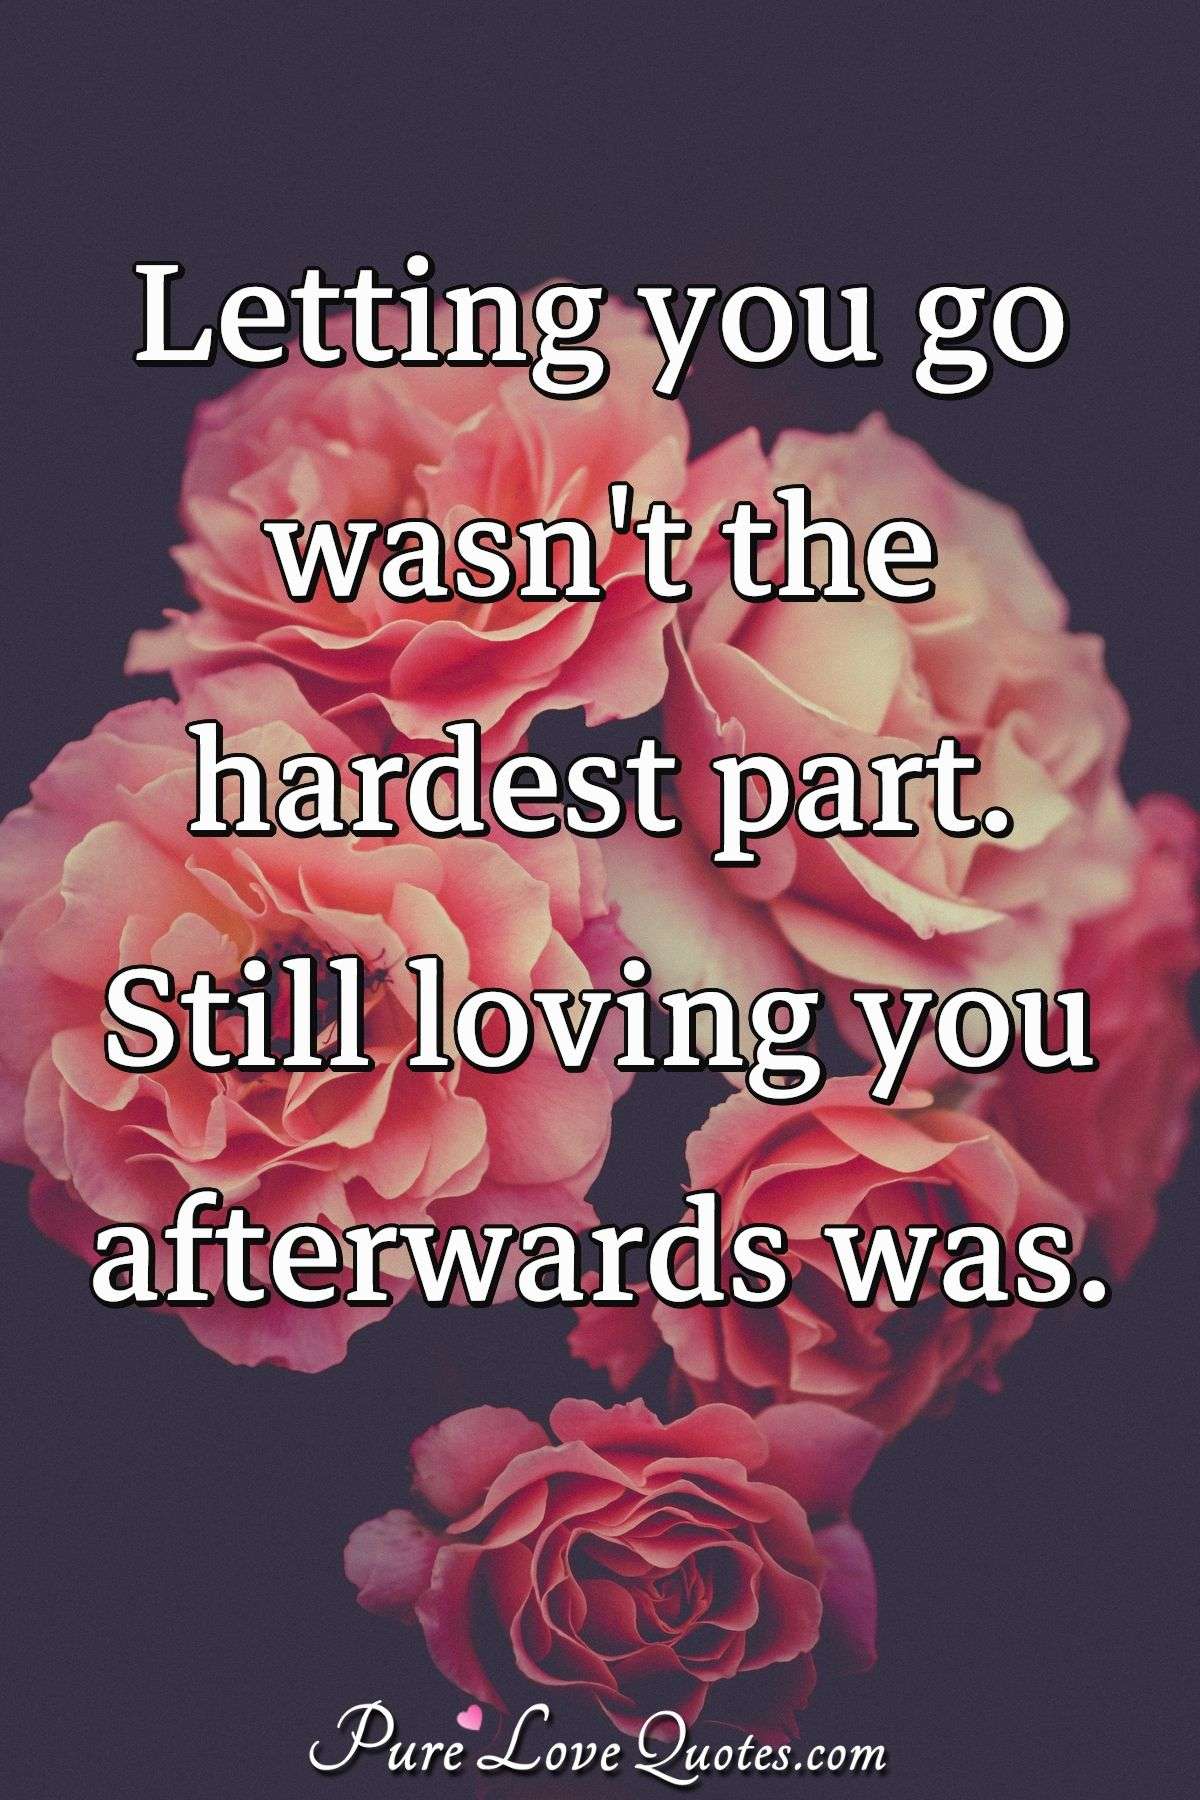 Letting you go wasn't the hardest part. Still loving you afterwards was. - Anonymous